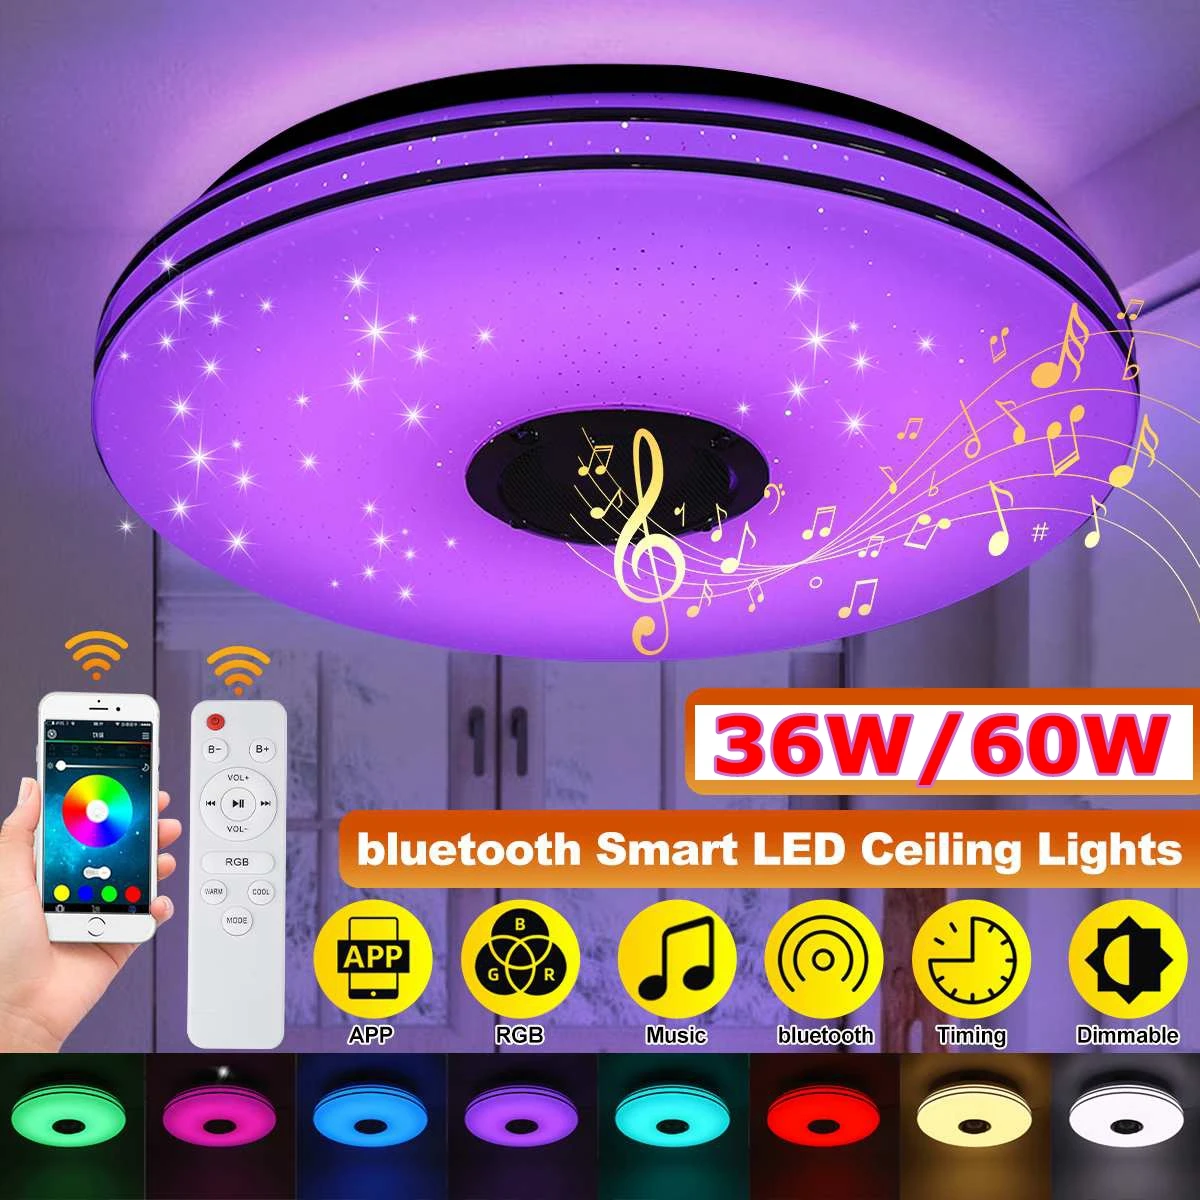 

36W/60W Music Led Ceiling Light Lamp RGB Flush Mount Round Music APP bluetooth Speaker Smart Ceiling Lamp With Remote Control